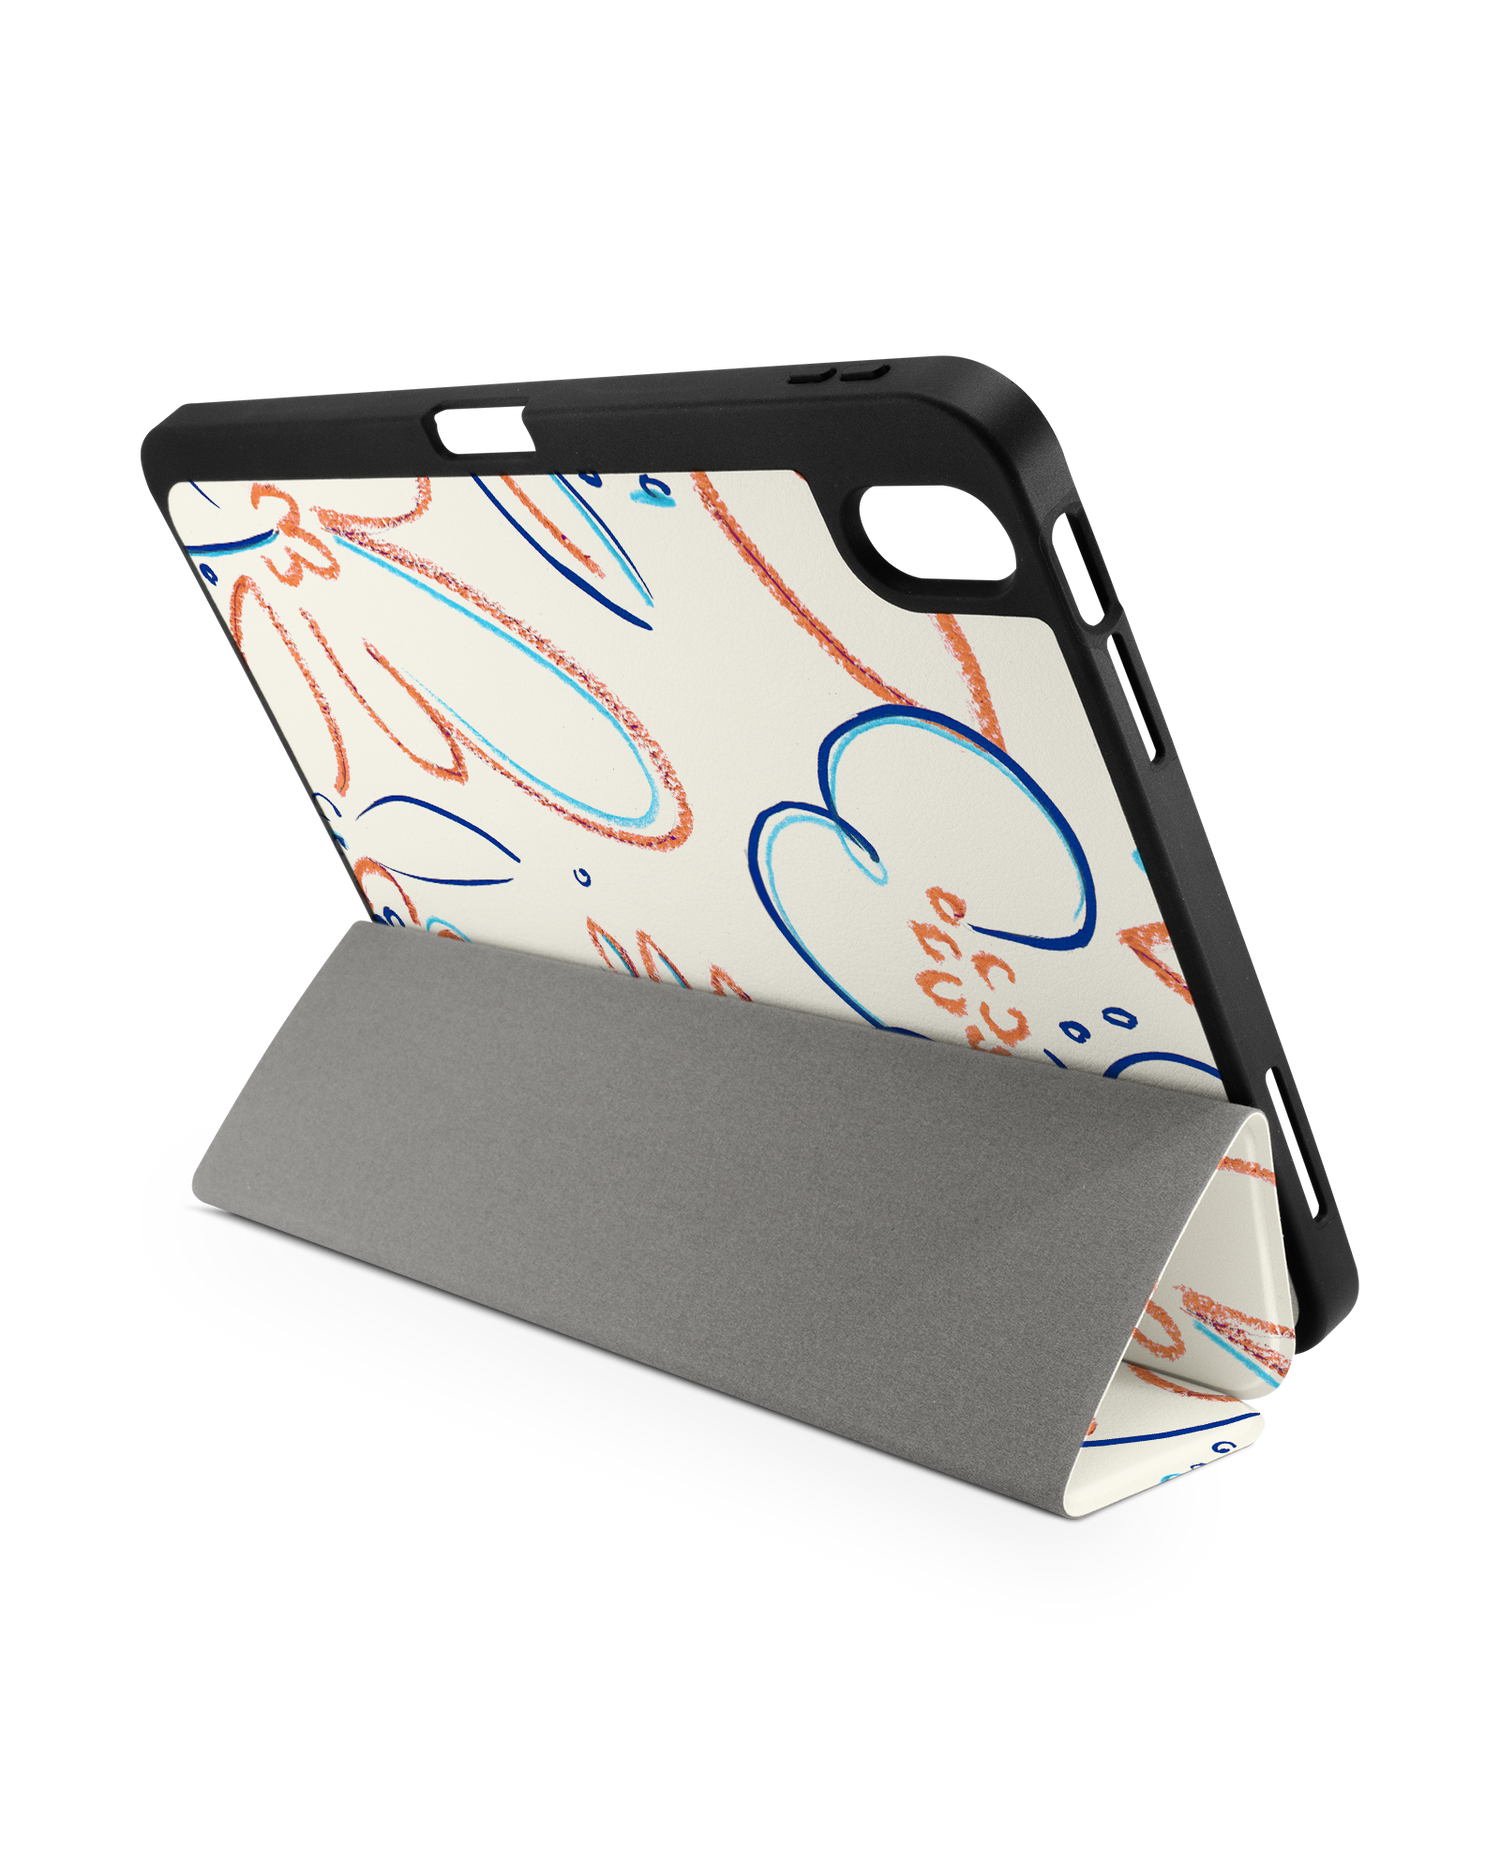 Bloom Doodles iPad Case with Pencil Holder for Apple iPad (10th Generation): Set up in landscape format (back view)